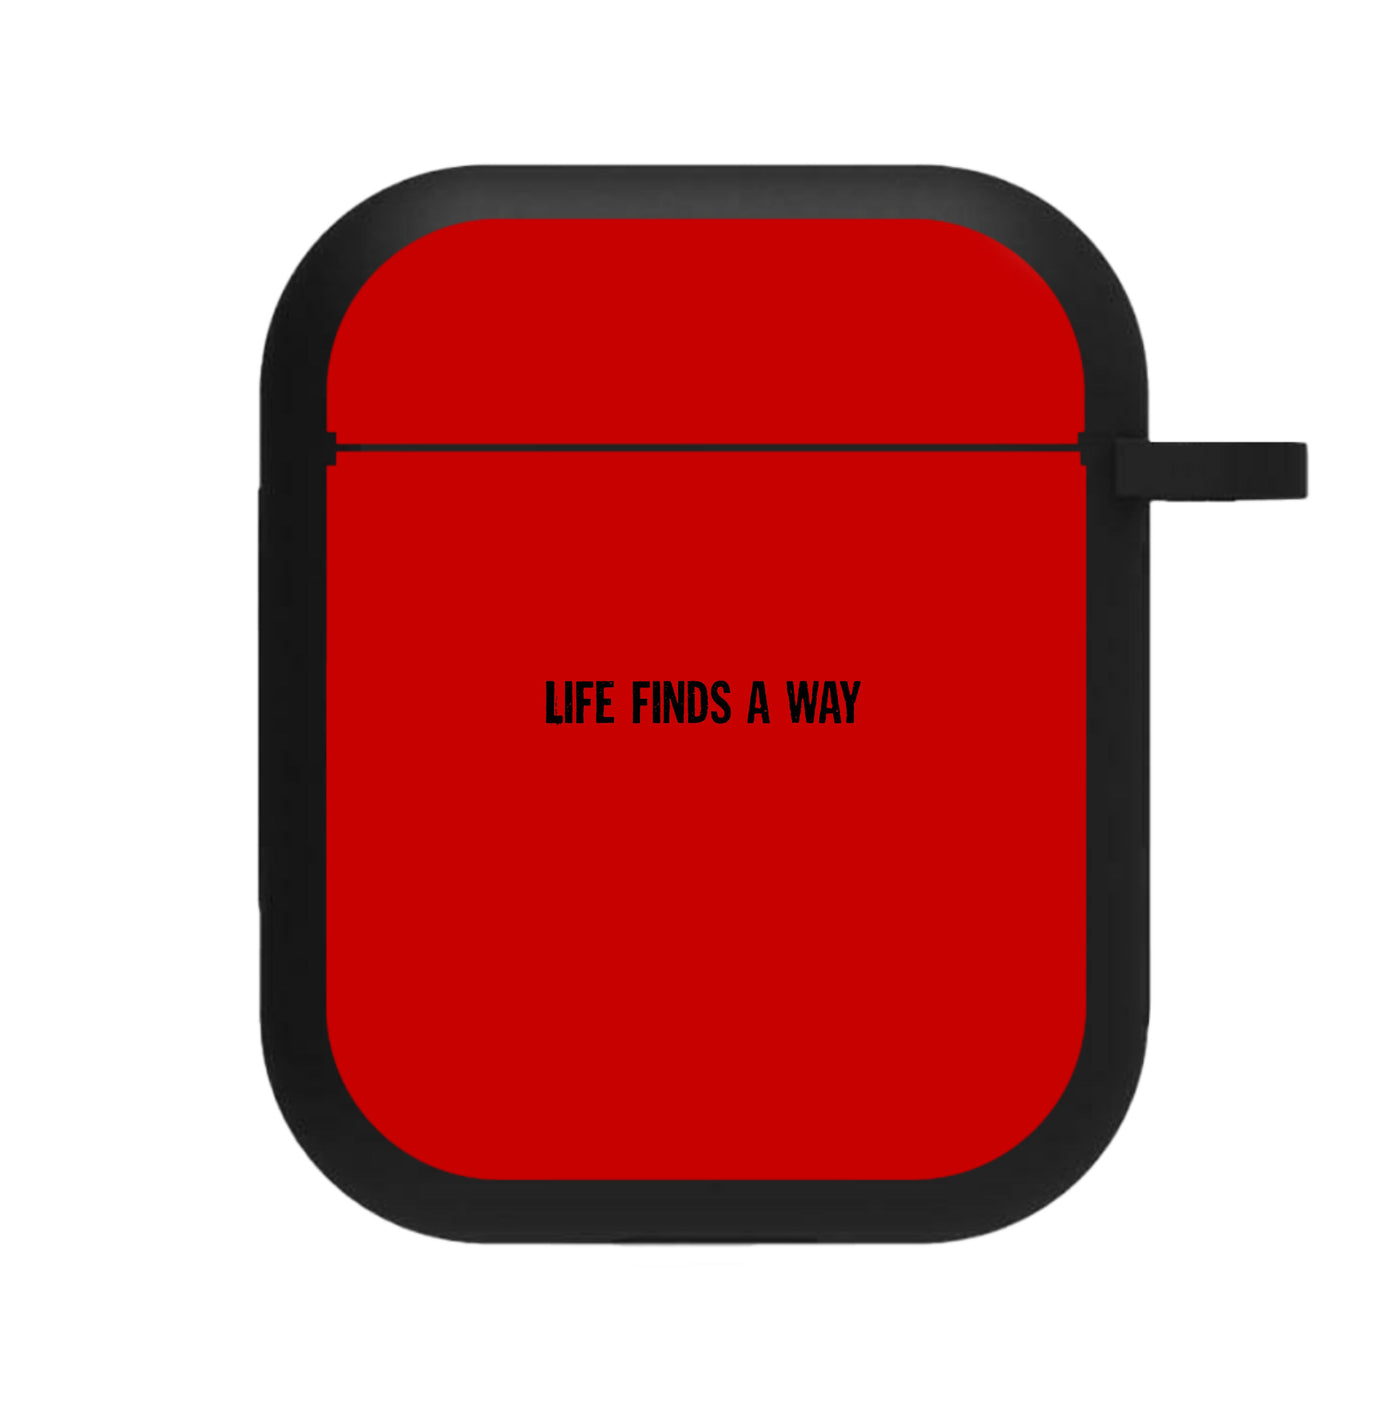 Life finds a way - Jurassic Park AirPods Case